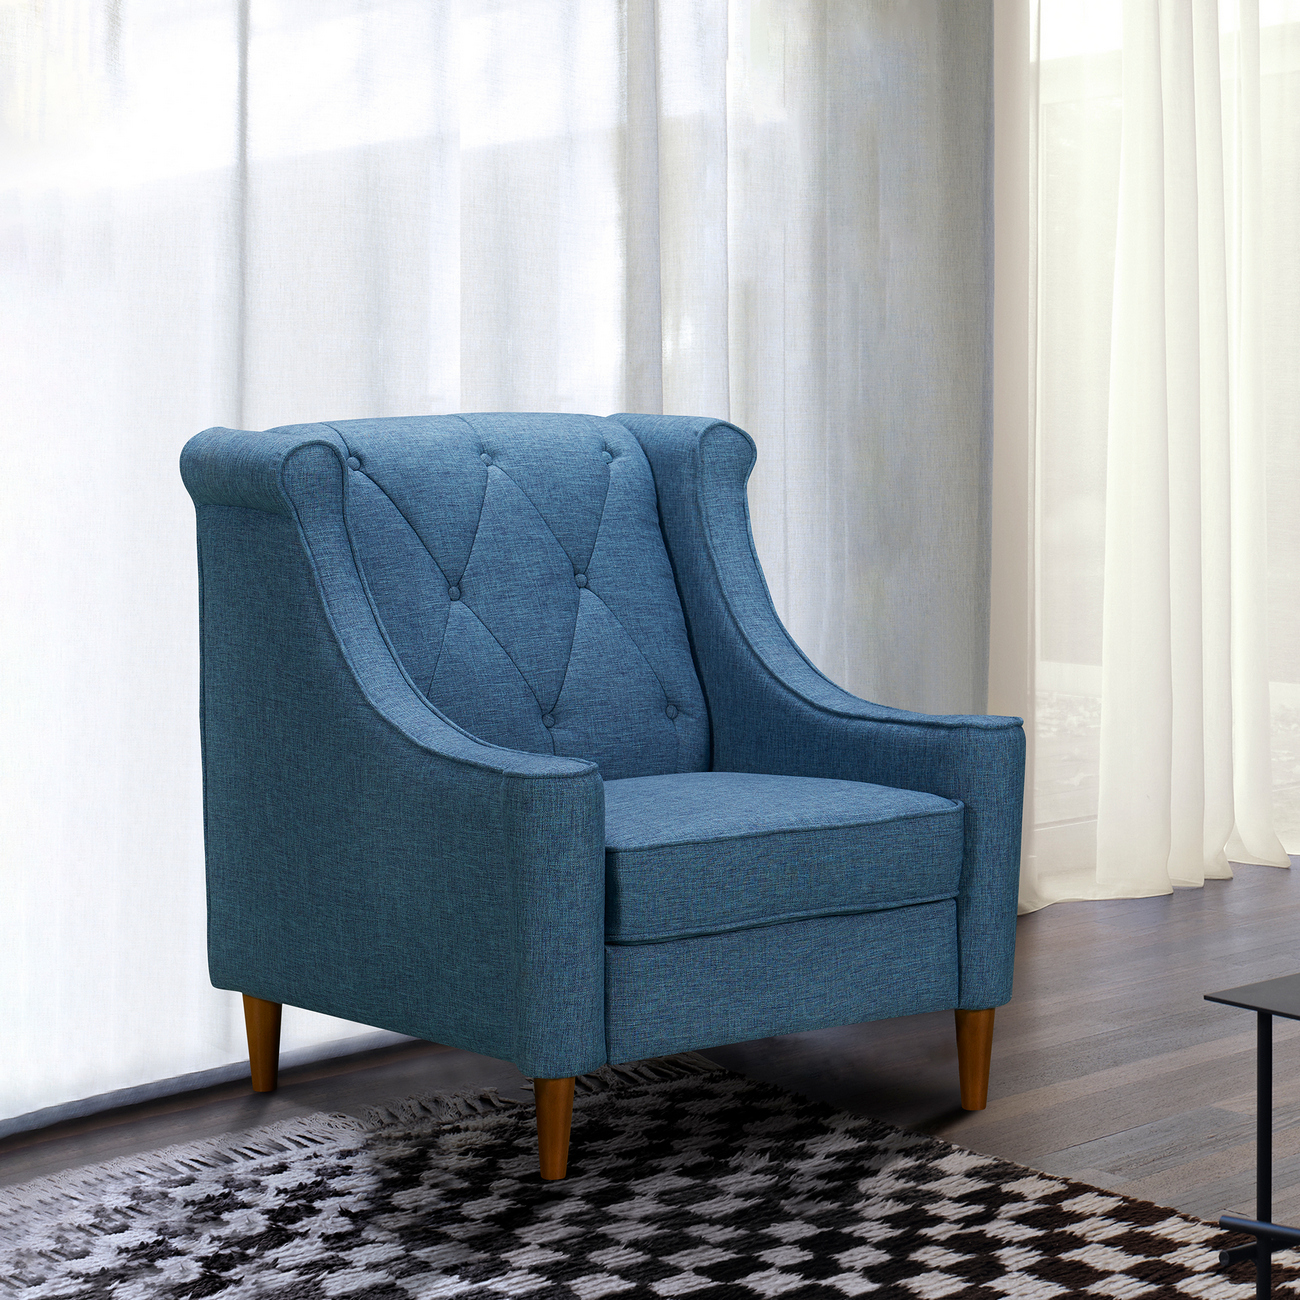 Luxe Mid-Century Sofa Chair in Champagne Wood Finish and Blue Fabric - Armen Living LCLX1BLUE - Sofas